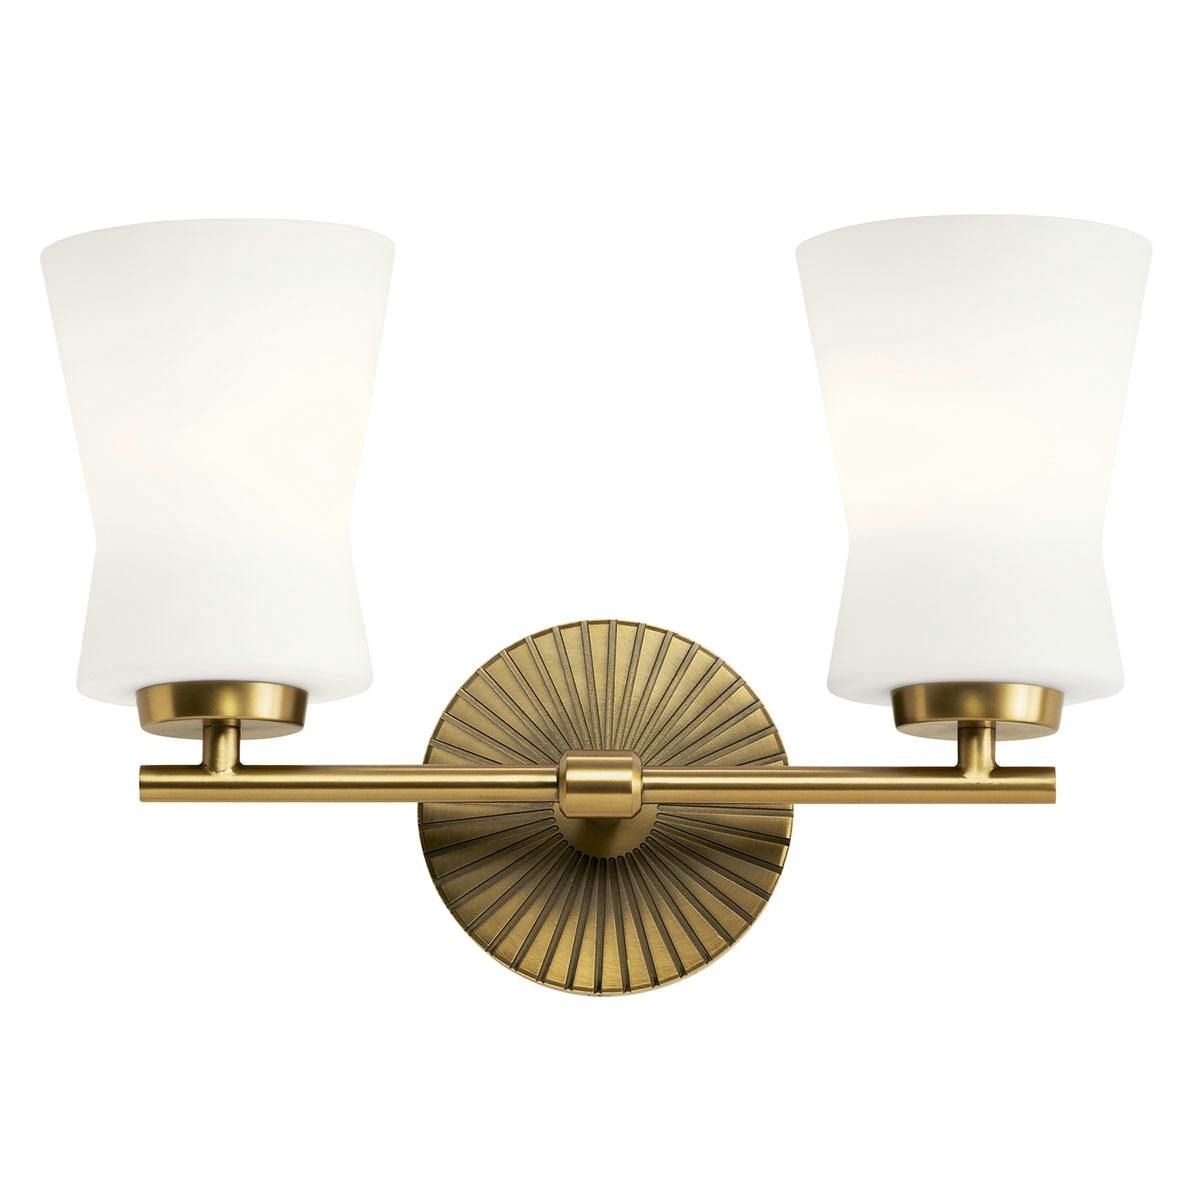 Front view of the Brianne 14.5" Vanity Light Brass on a white background